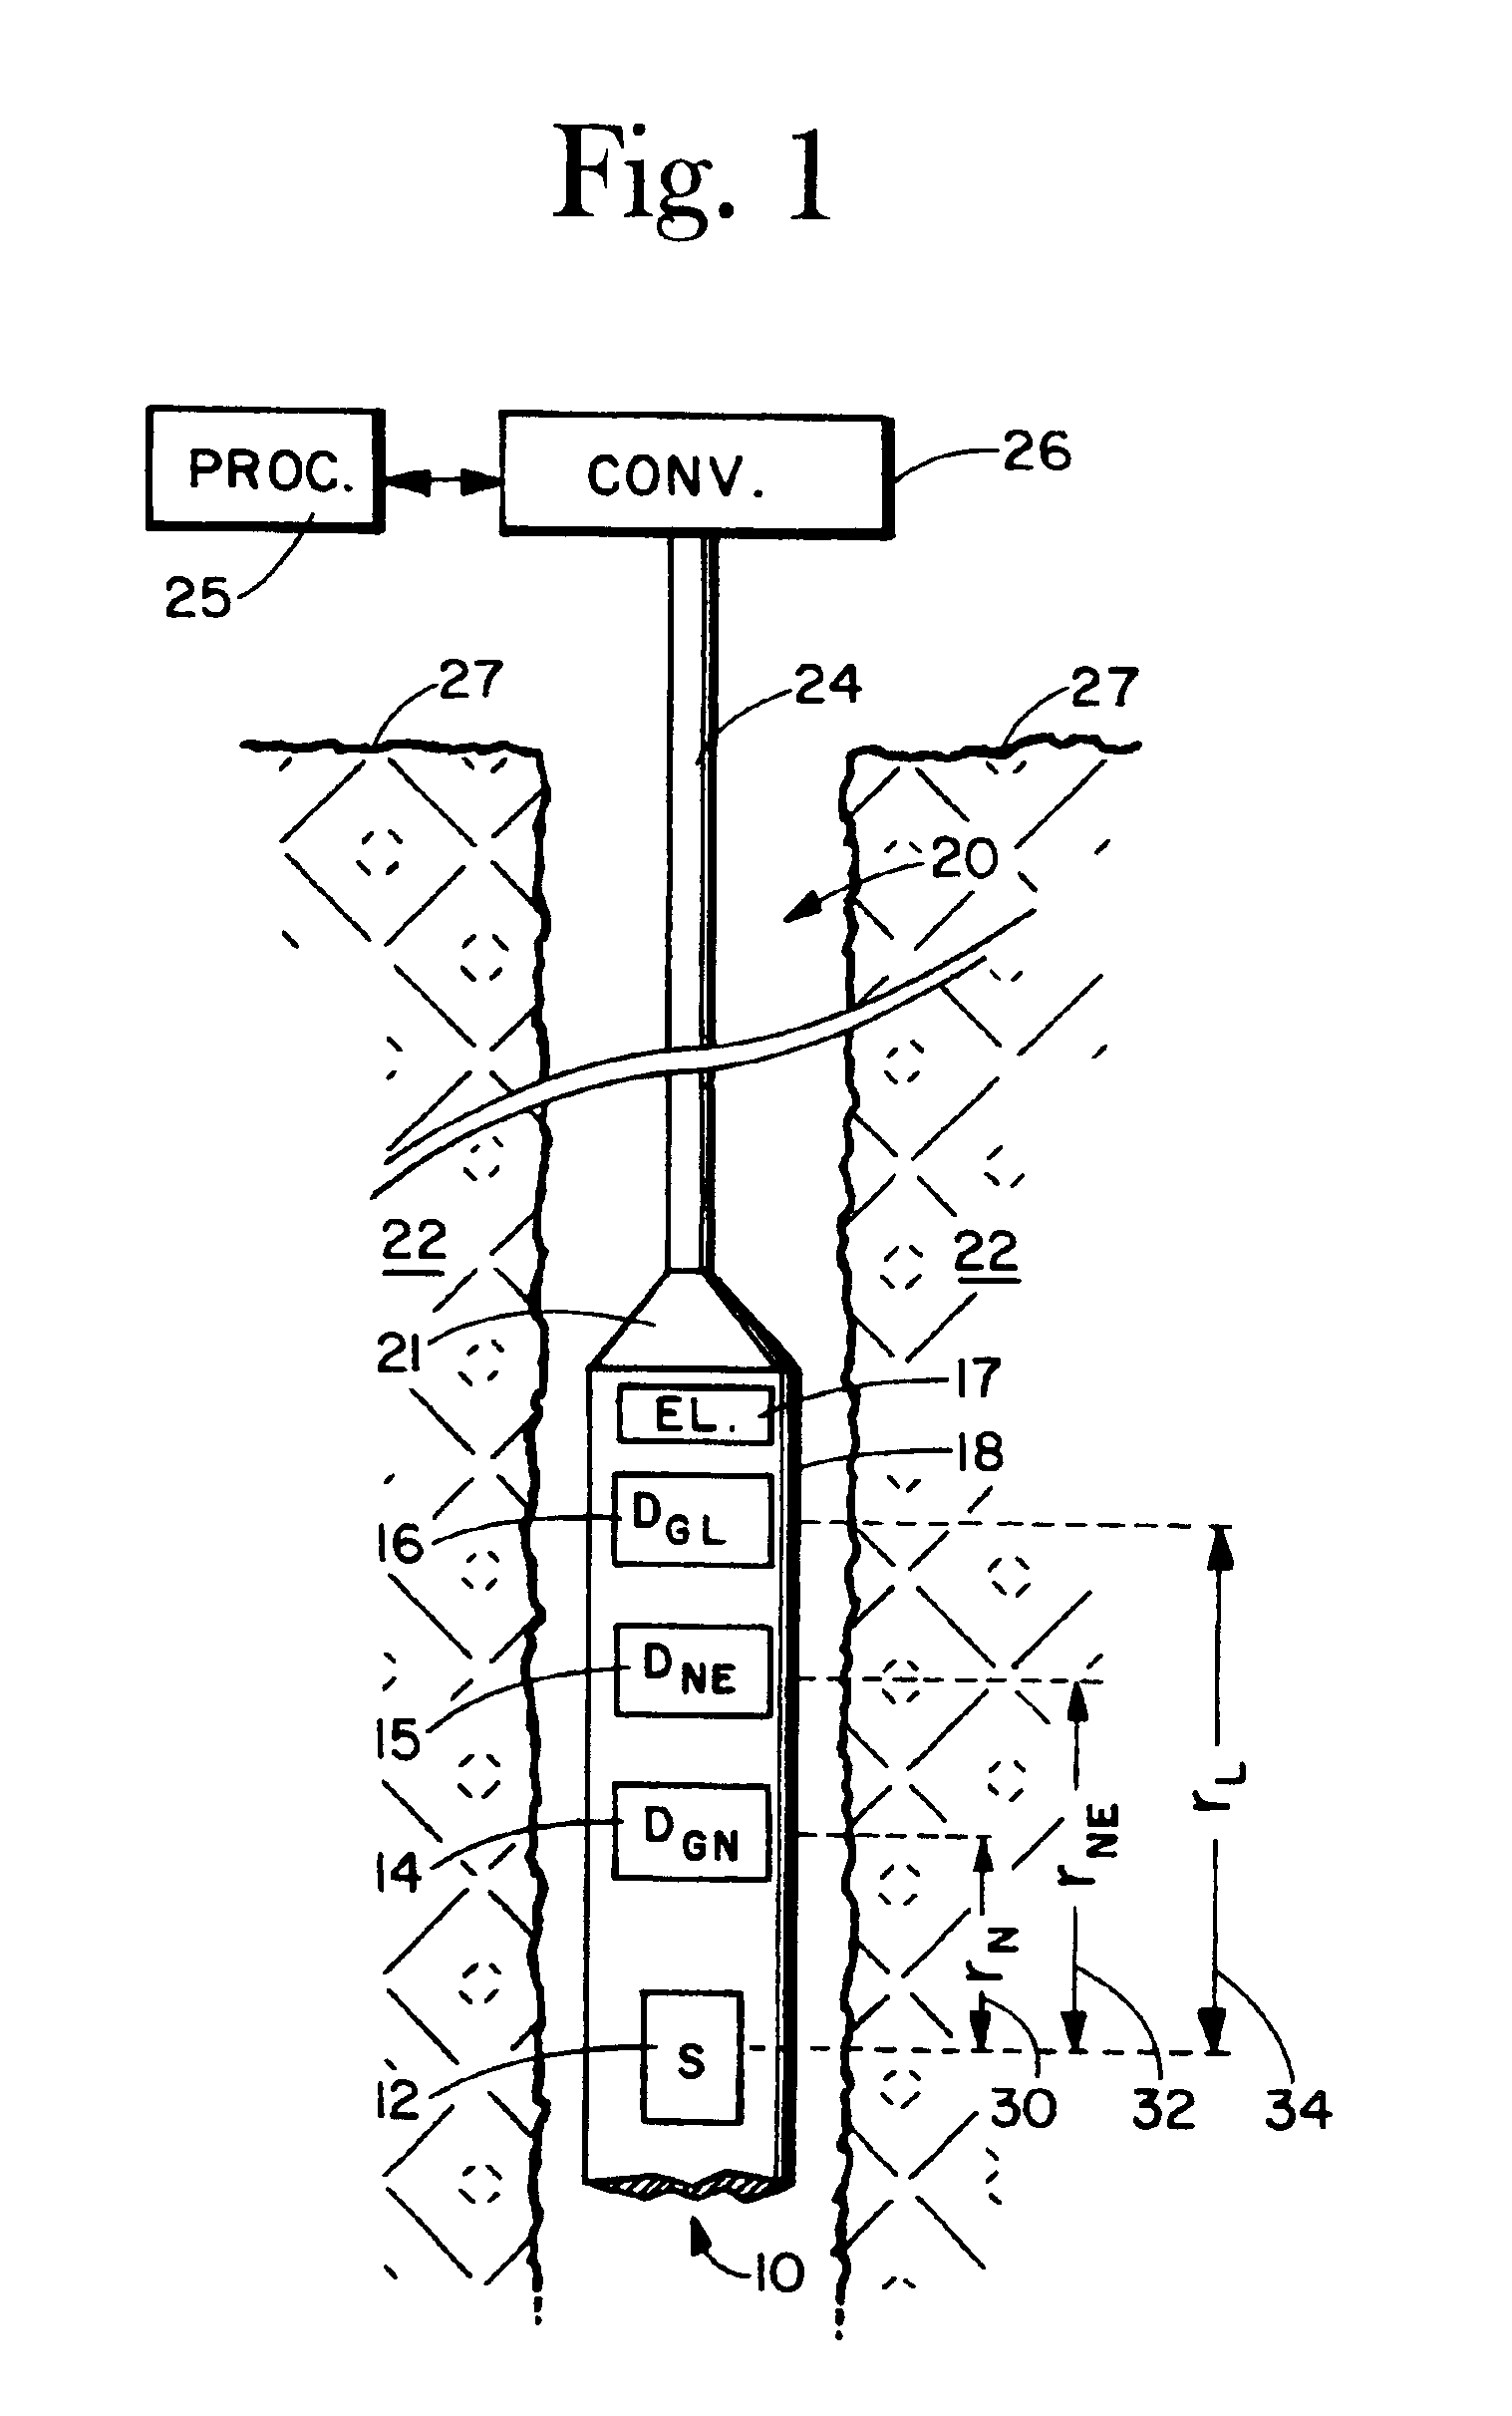 Apparatus and method for determining density, porosity and fluid saturation of formations penetrated by a borehole